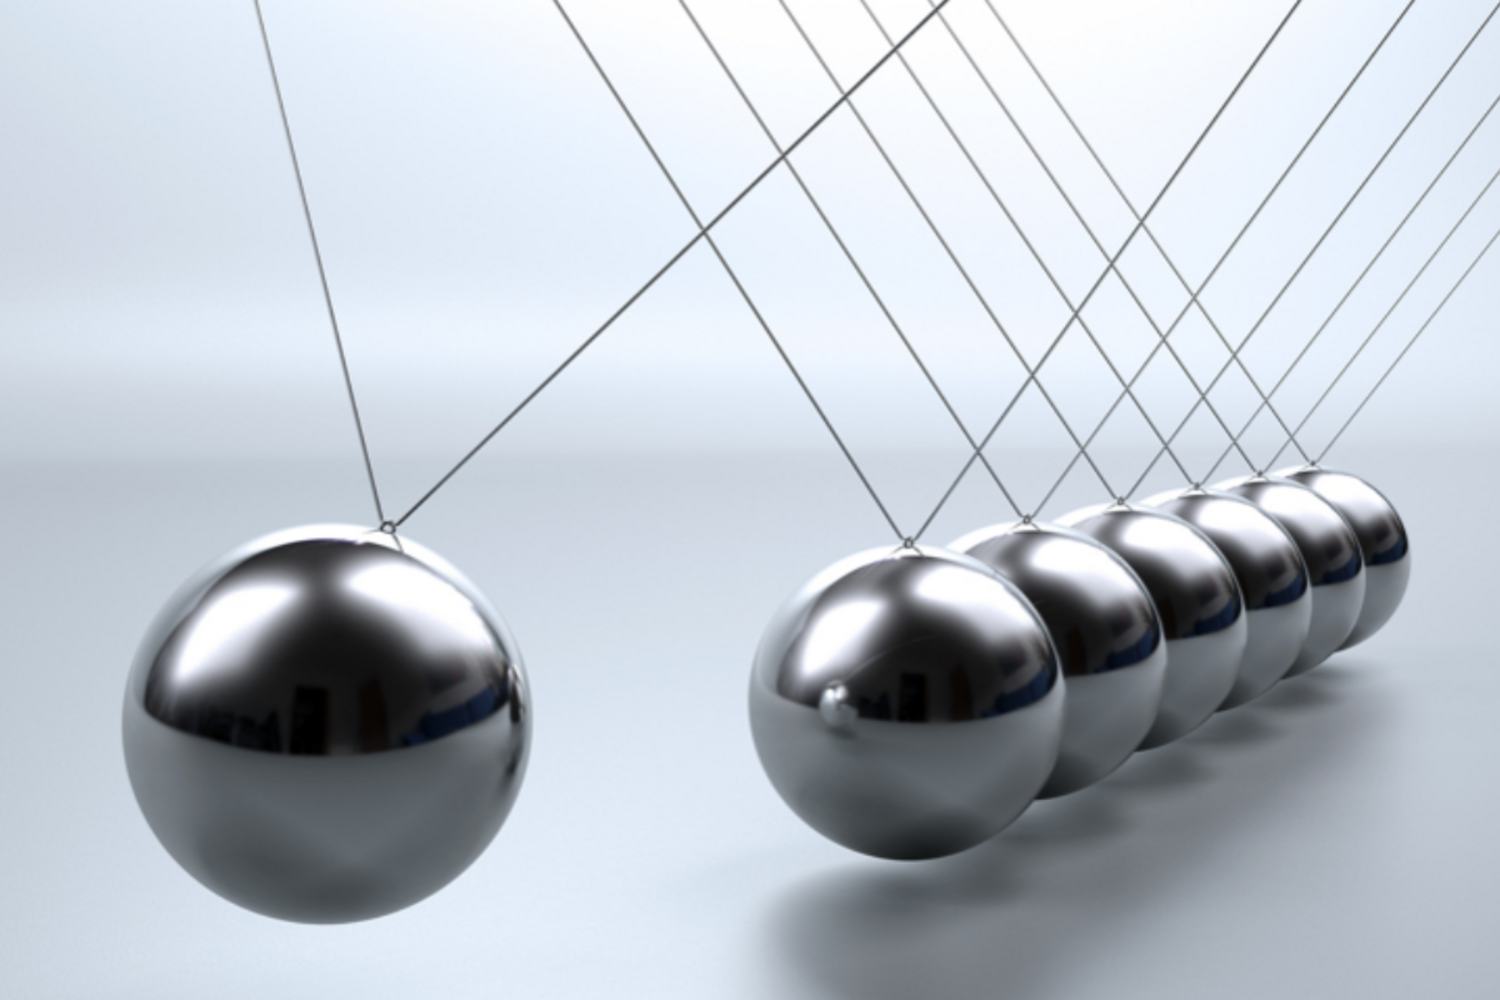 Image of a Newton's cradle in motion.